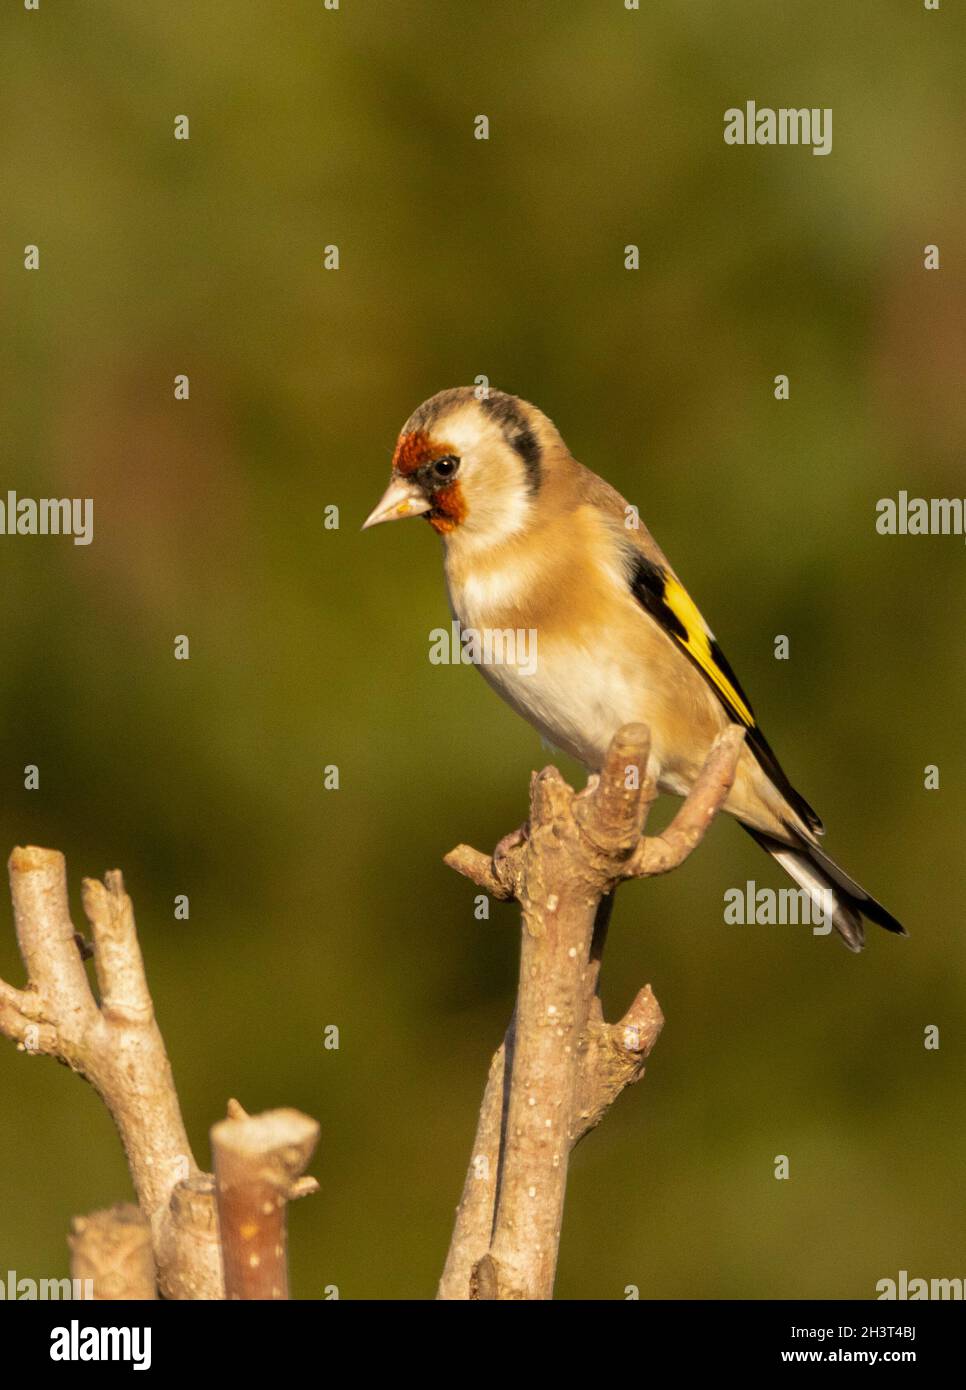 Goldfinch, carduelis carduelis, perched on a Branch in a British Garden, Bedfordshire, UK Stock Photo